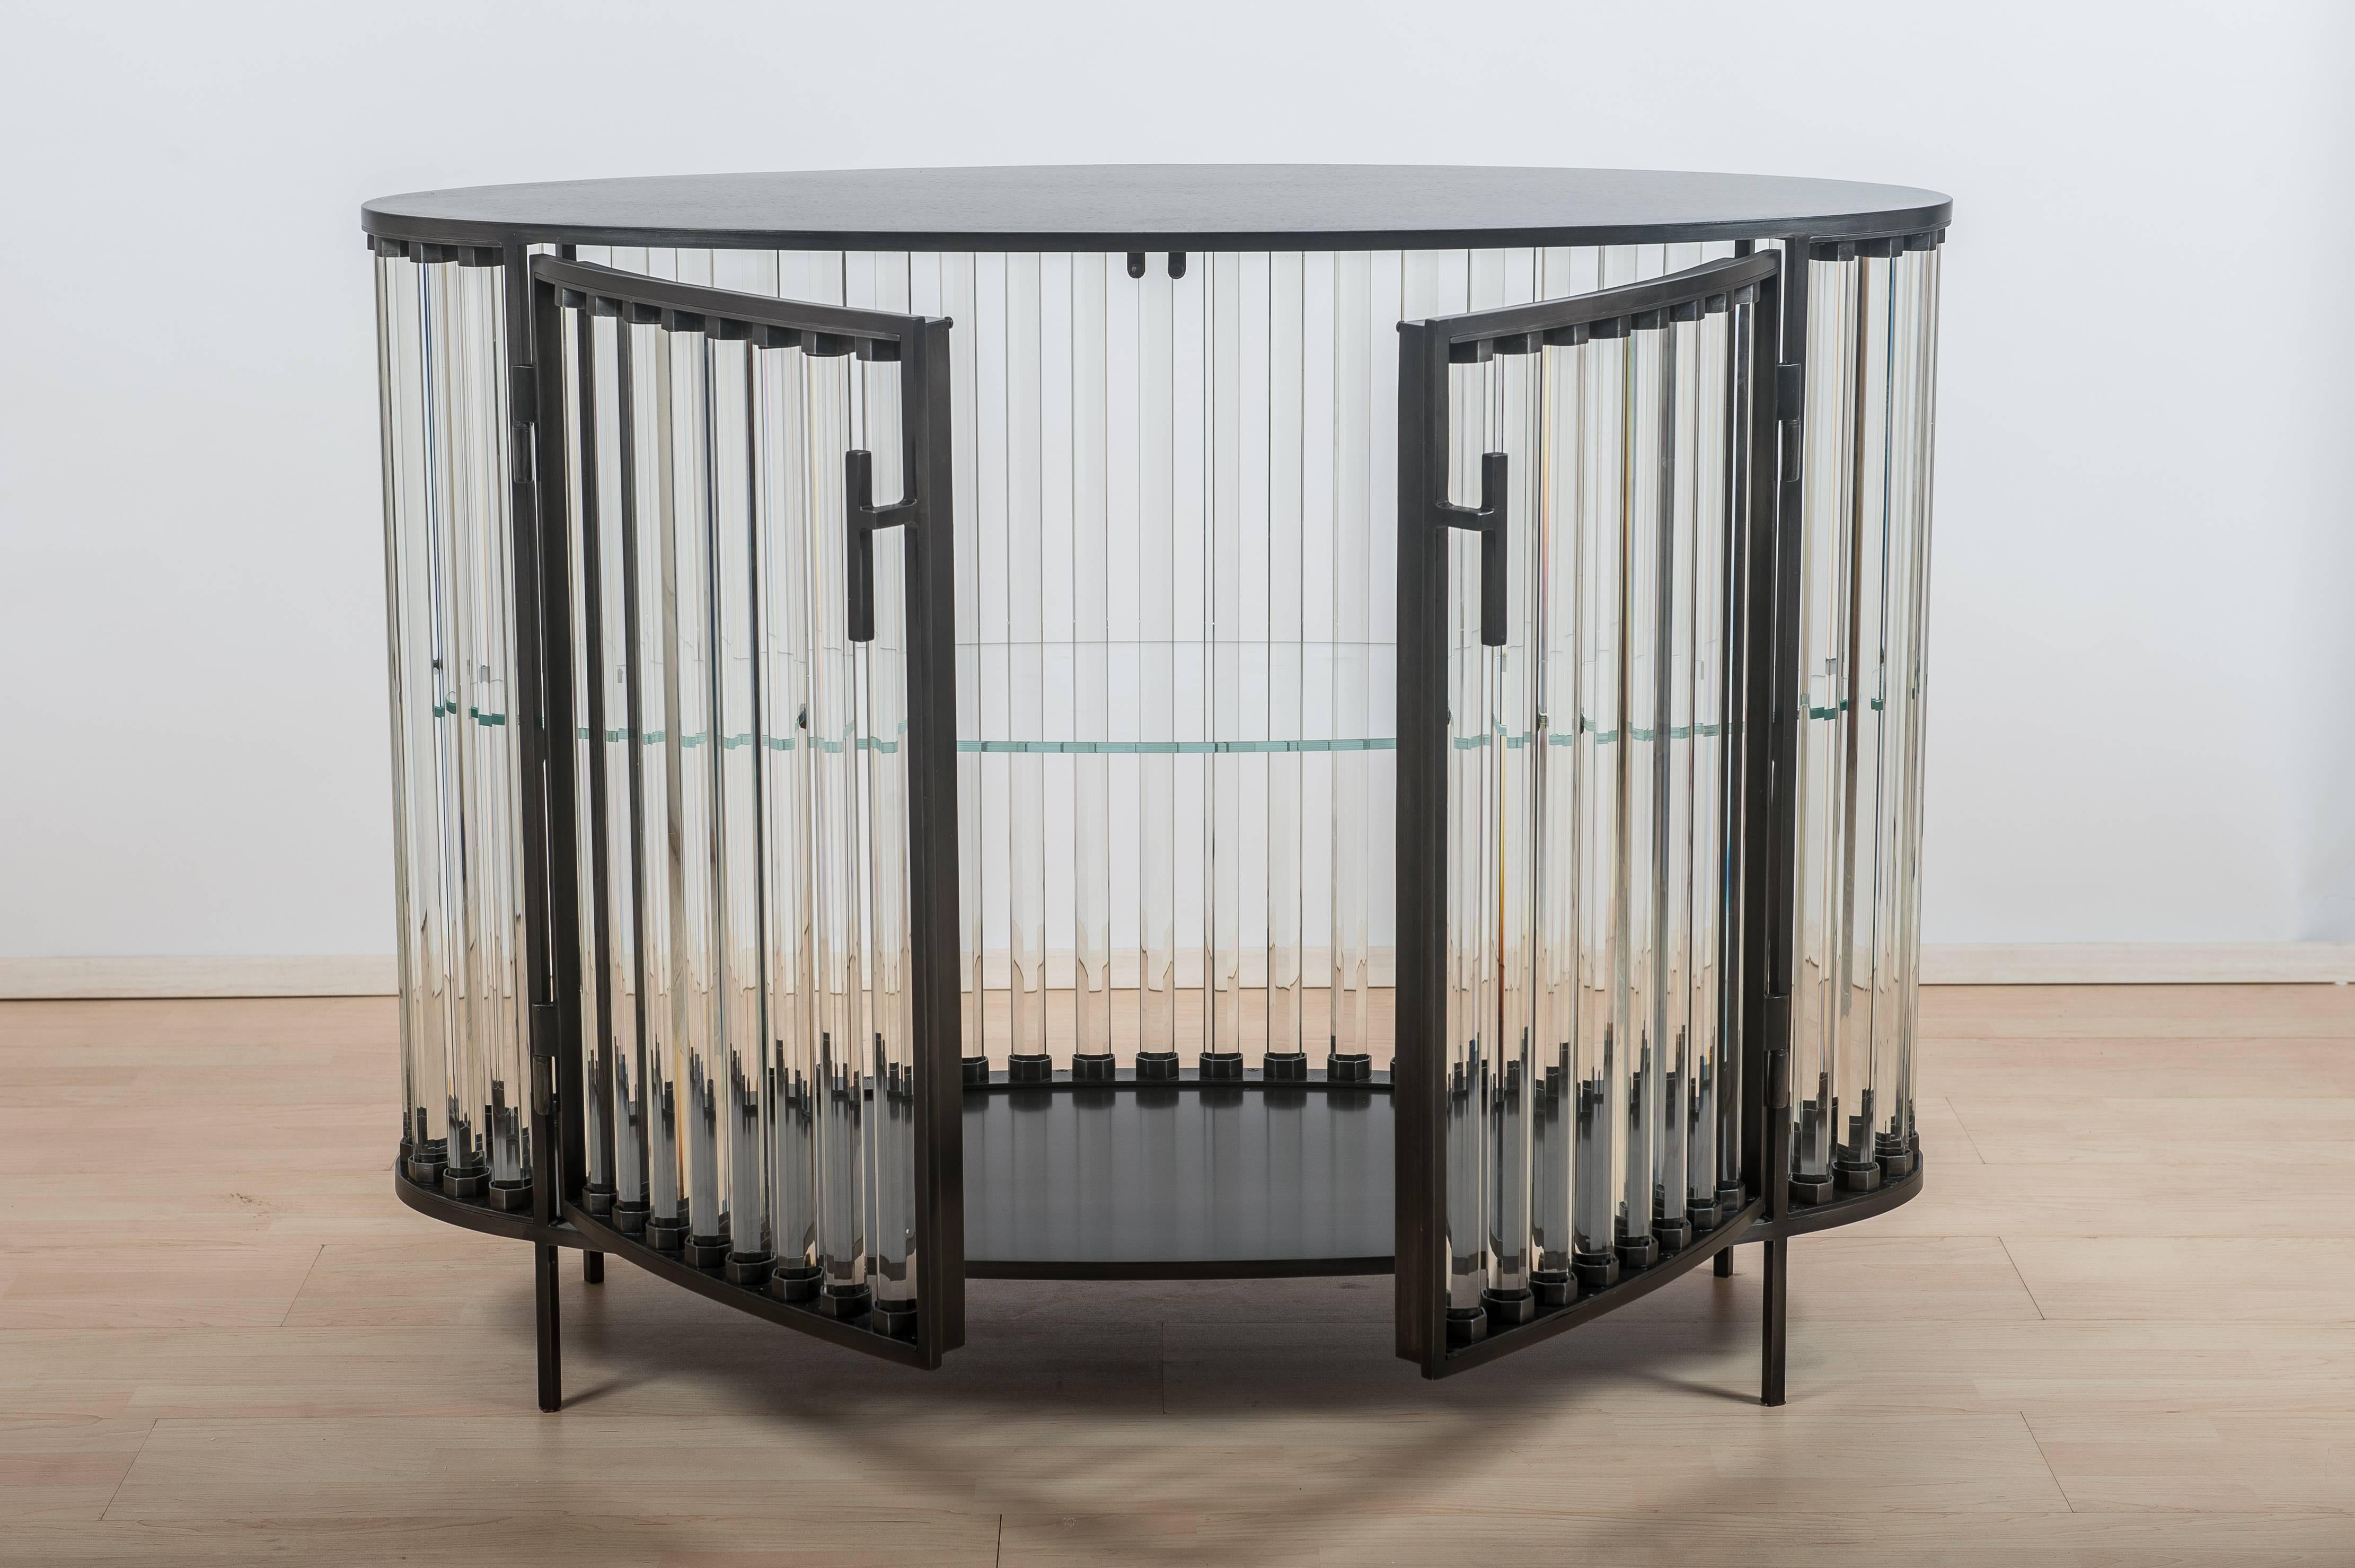 French Oval Cabinet in Iron and Glass by Christophe Côme, 2017